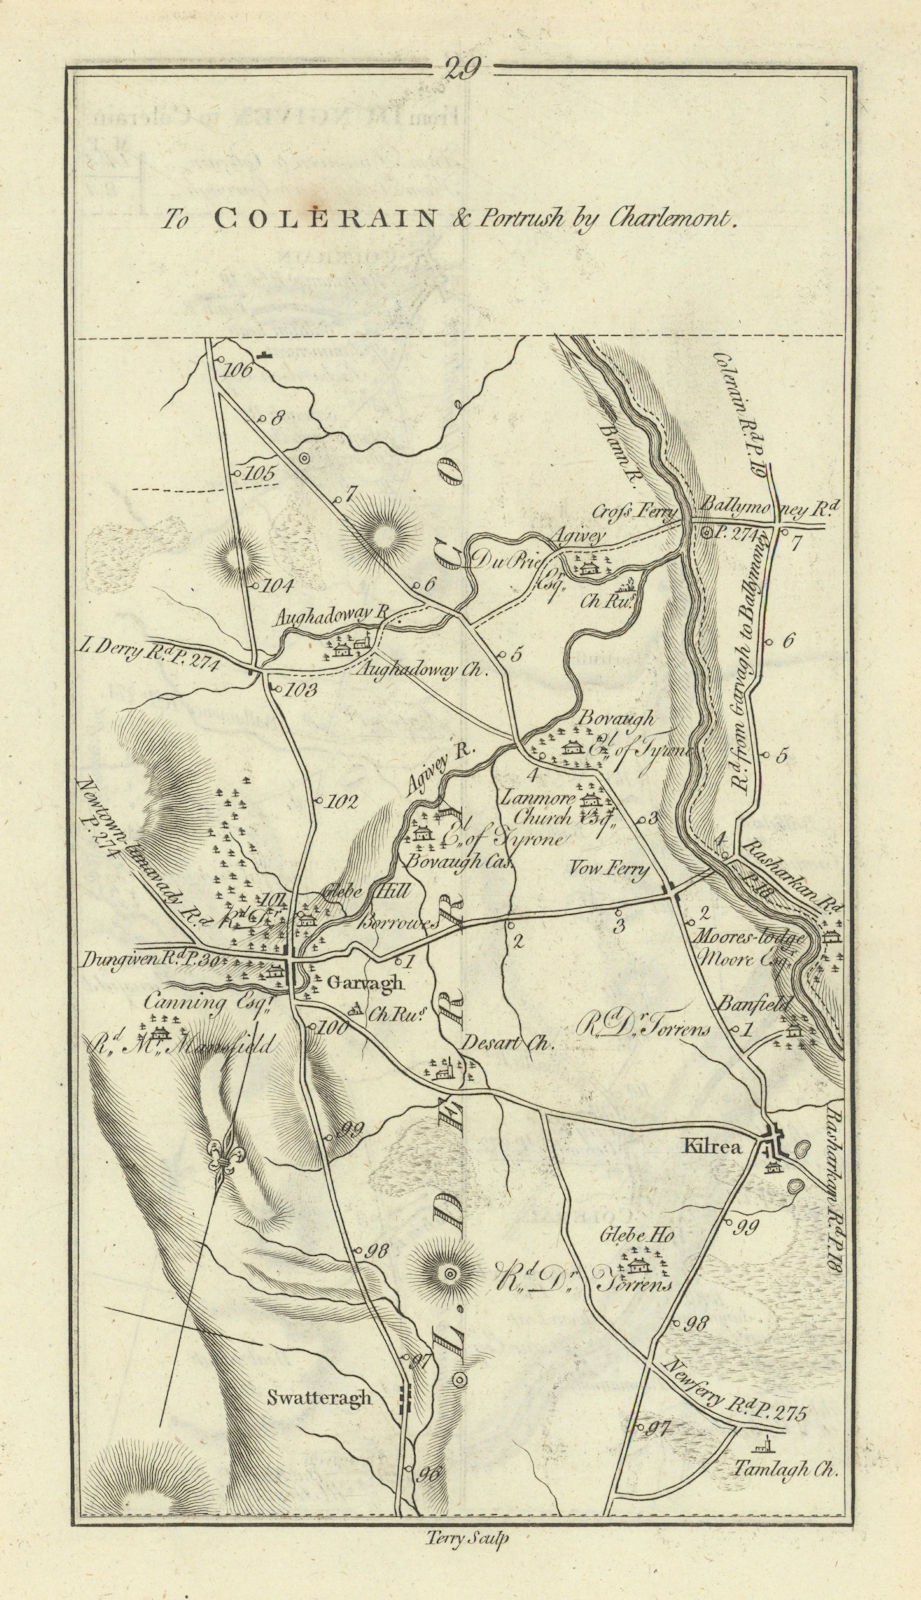 Associate Product #29 to Coleraine… by Charlemont. Garvagh Kilrea Swatragh TAYLOR/SKINNER 1778 map